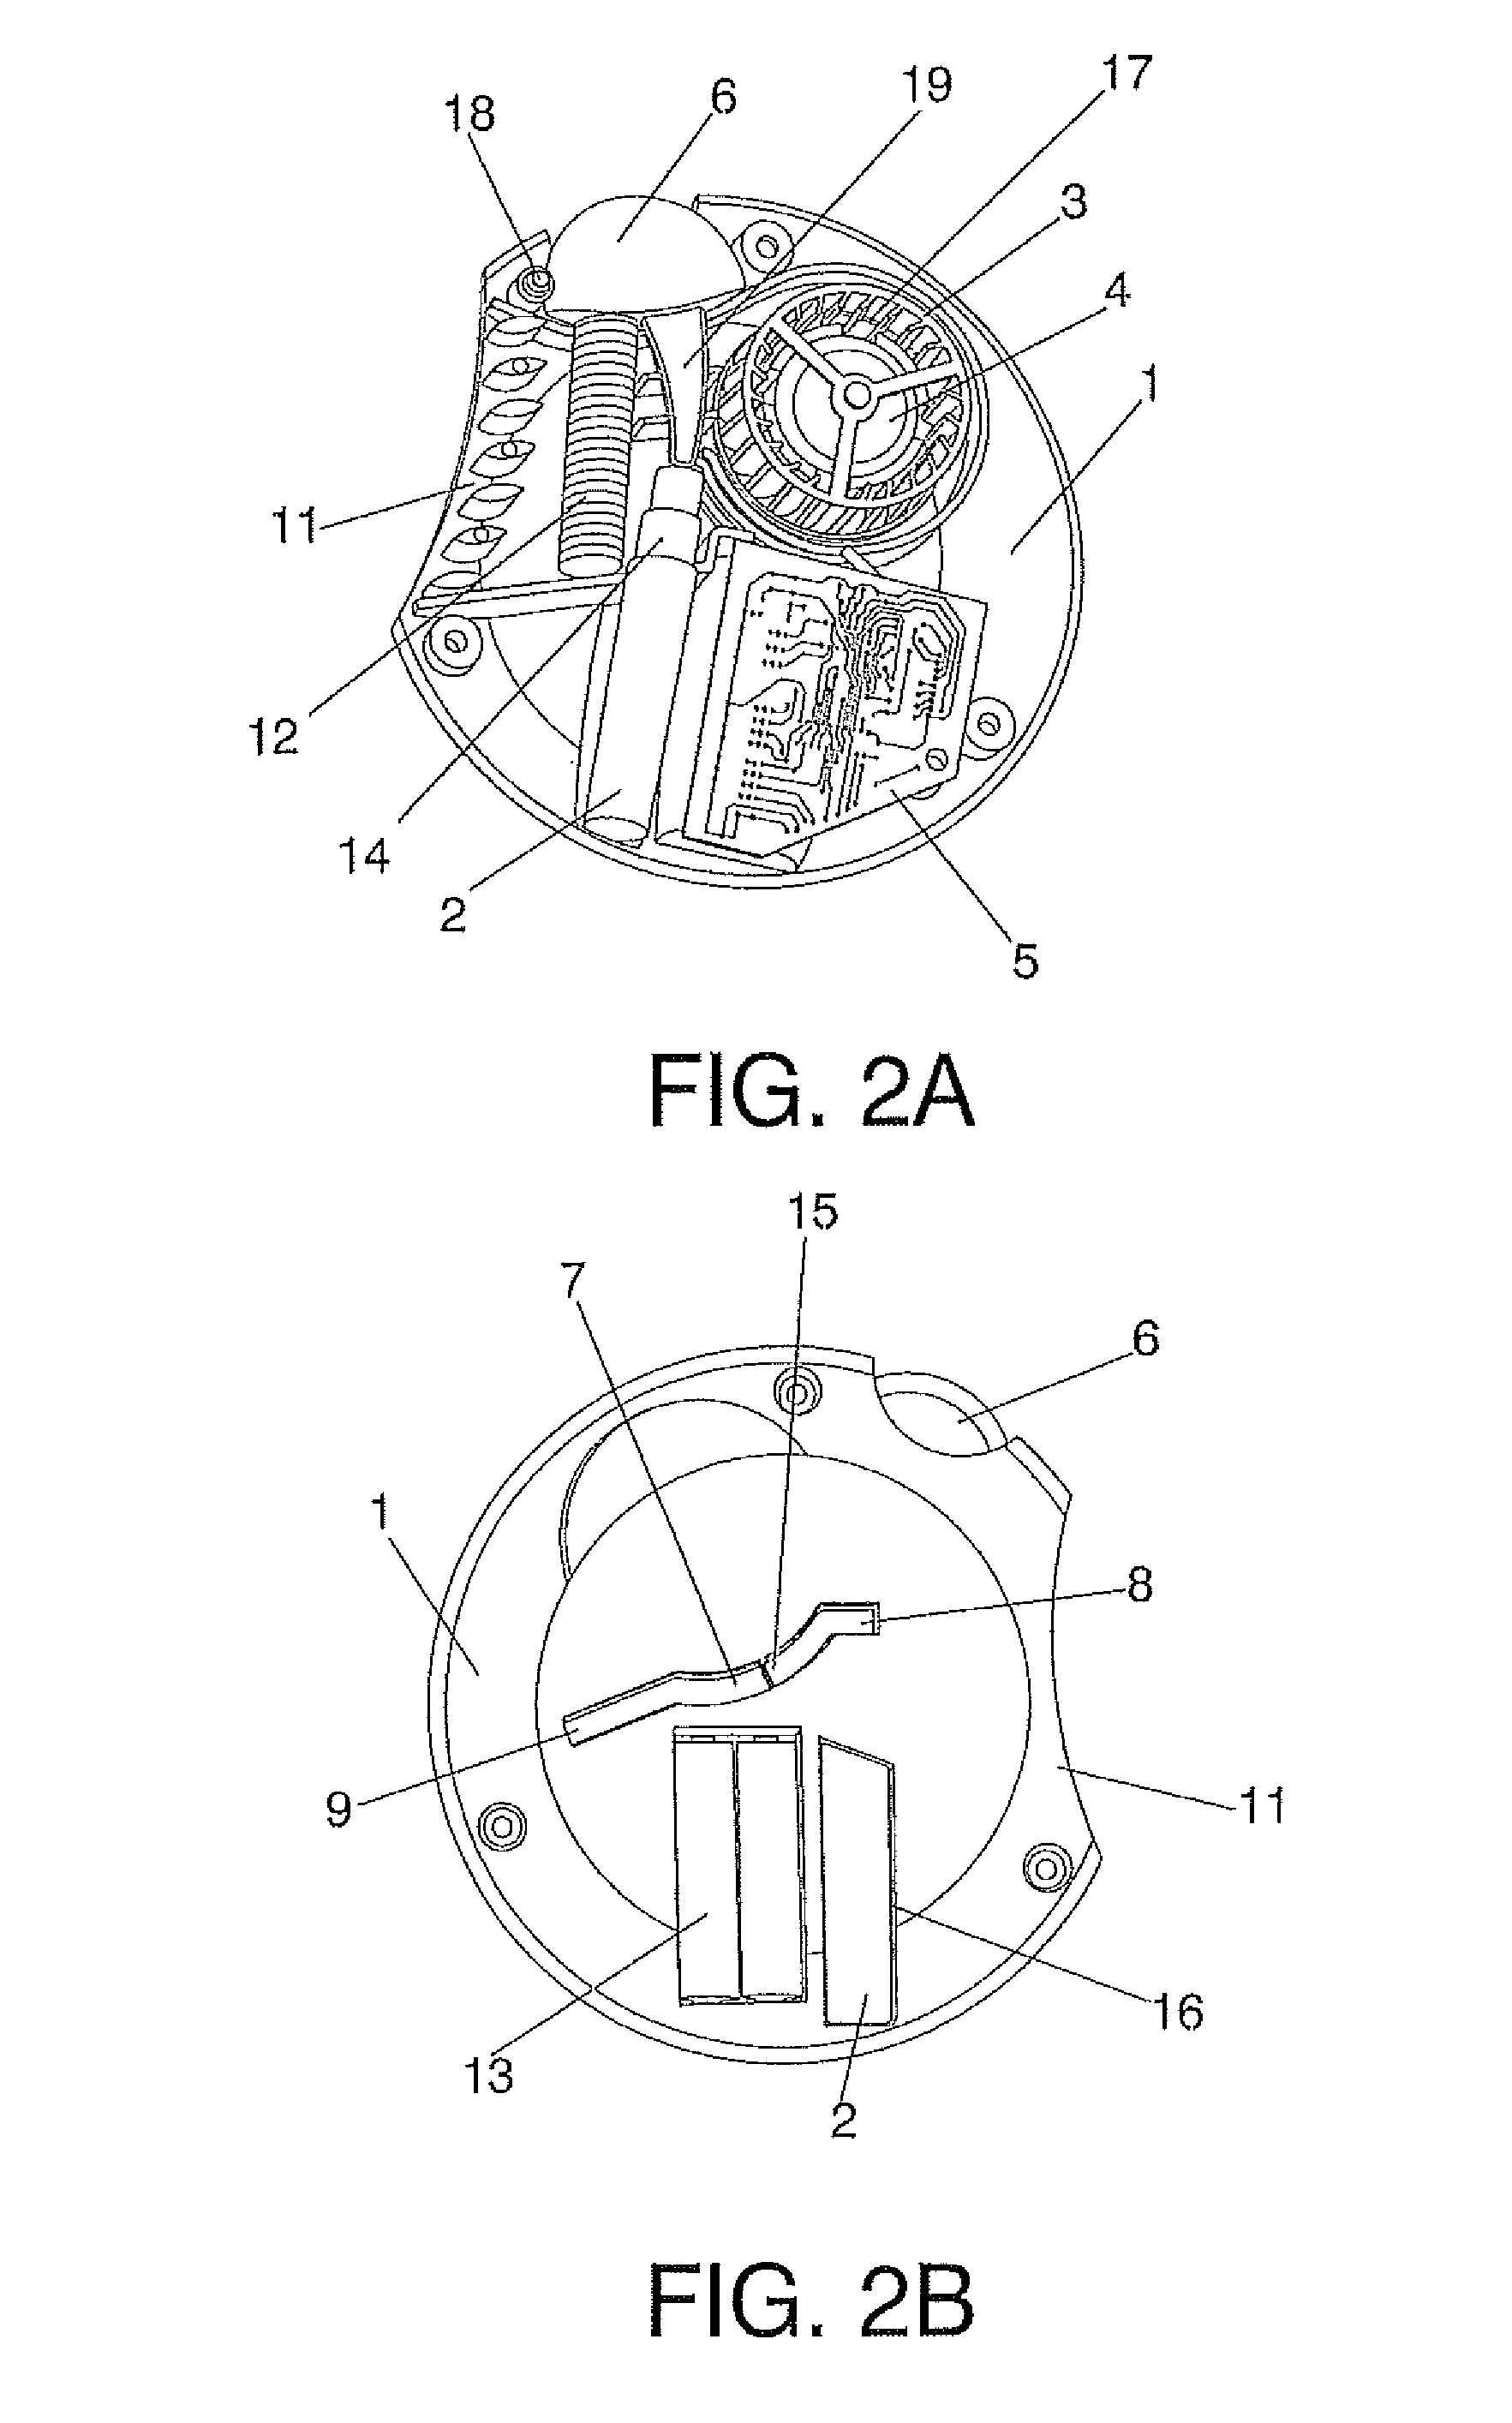 Method and device to evaporate active ingredients from a liquid solution